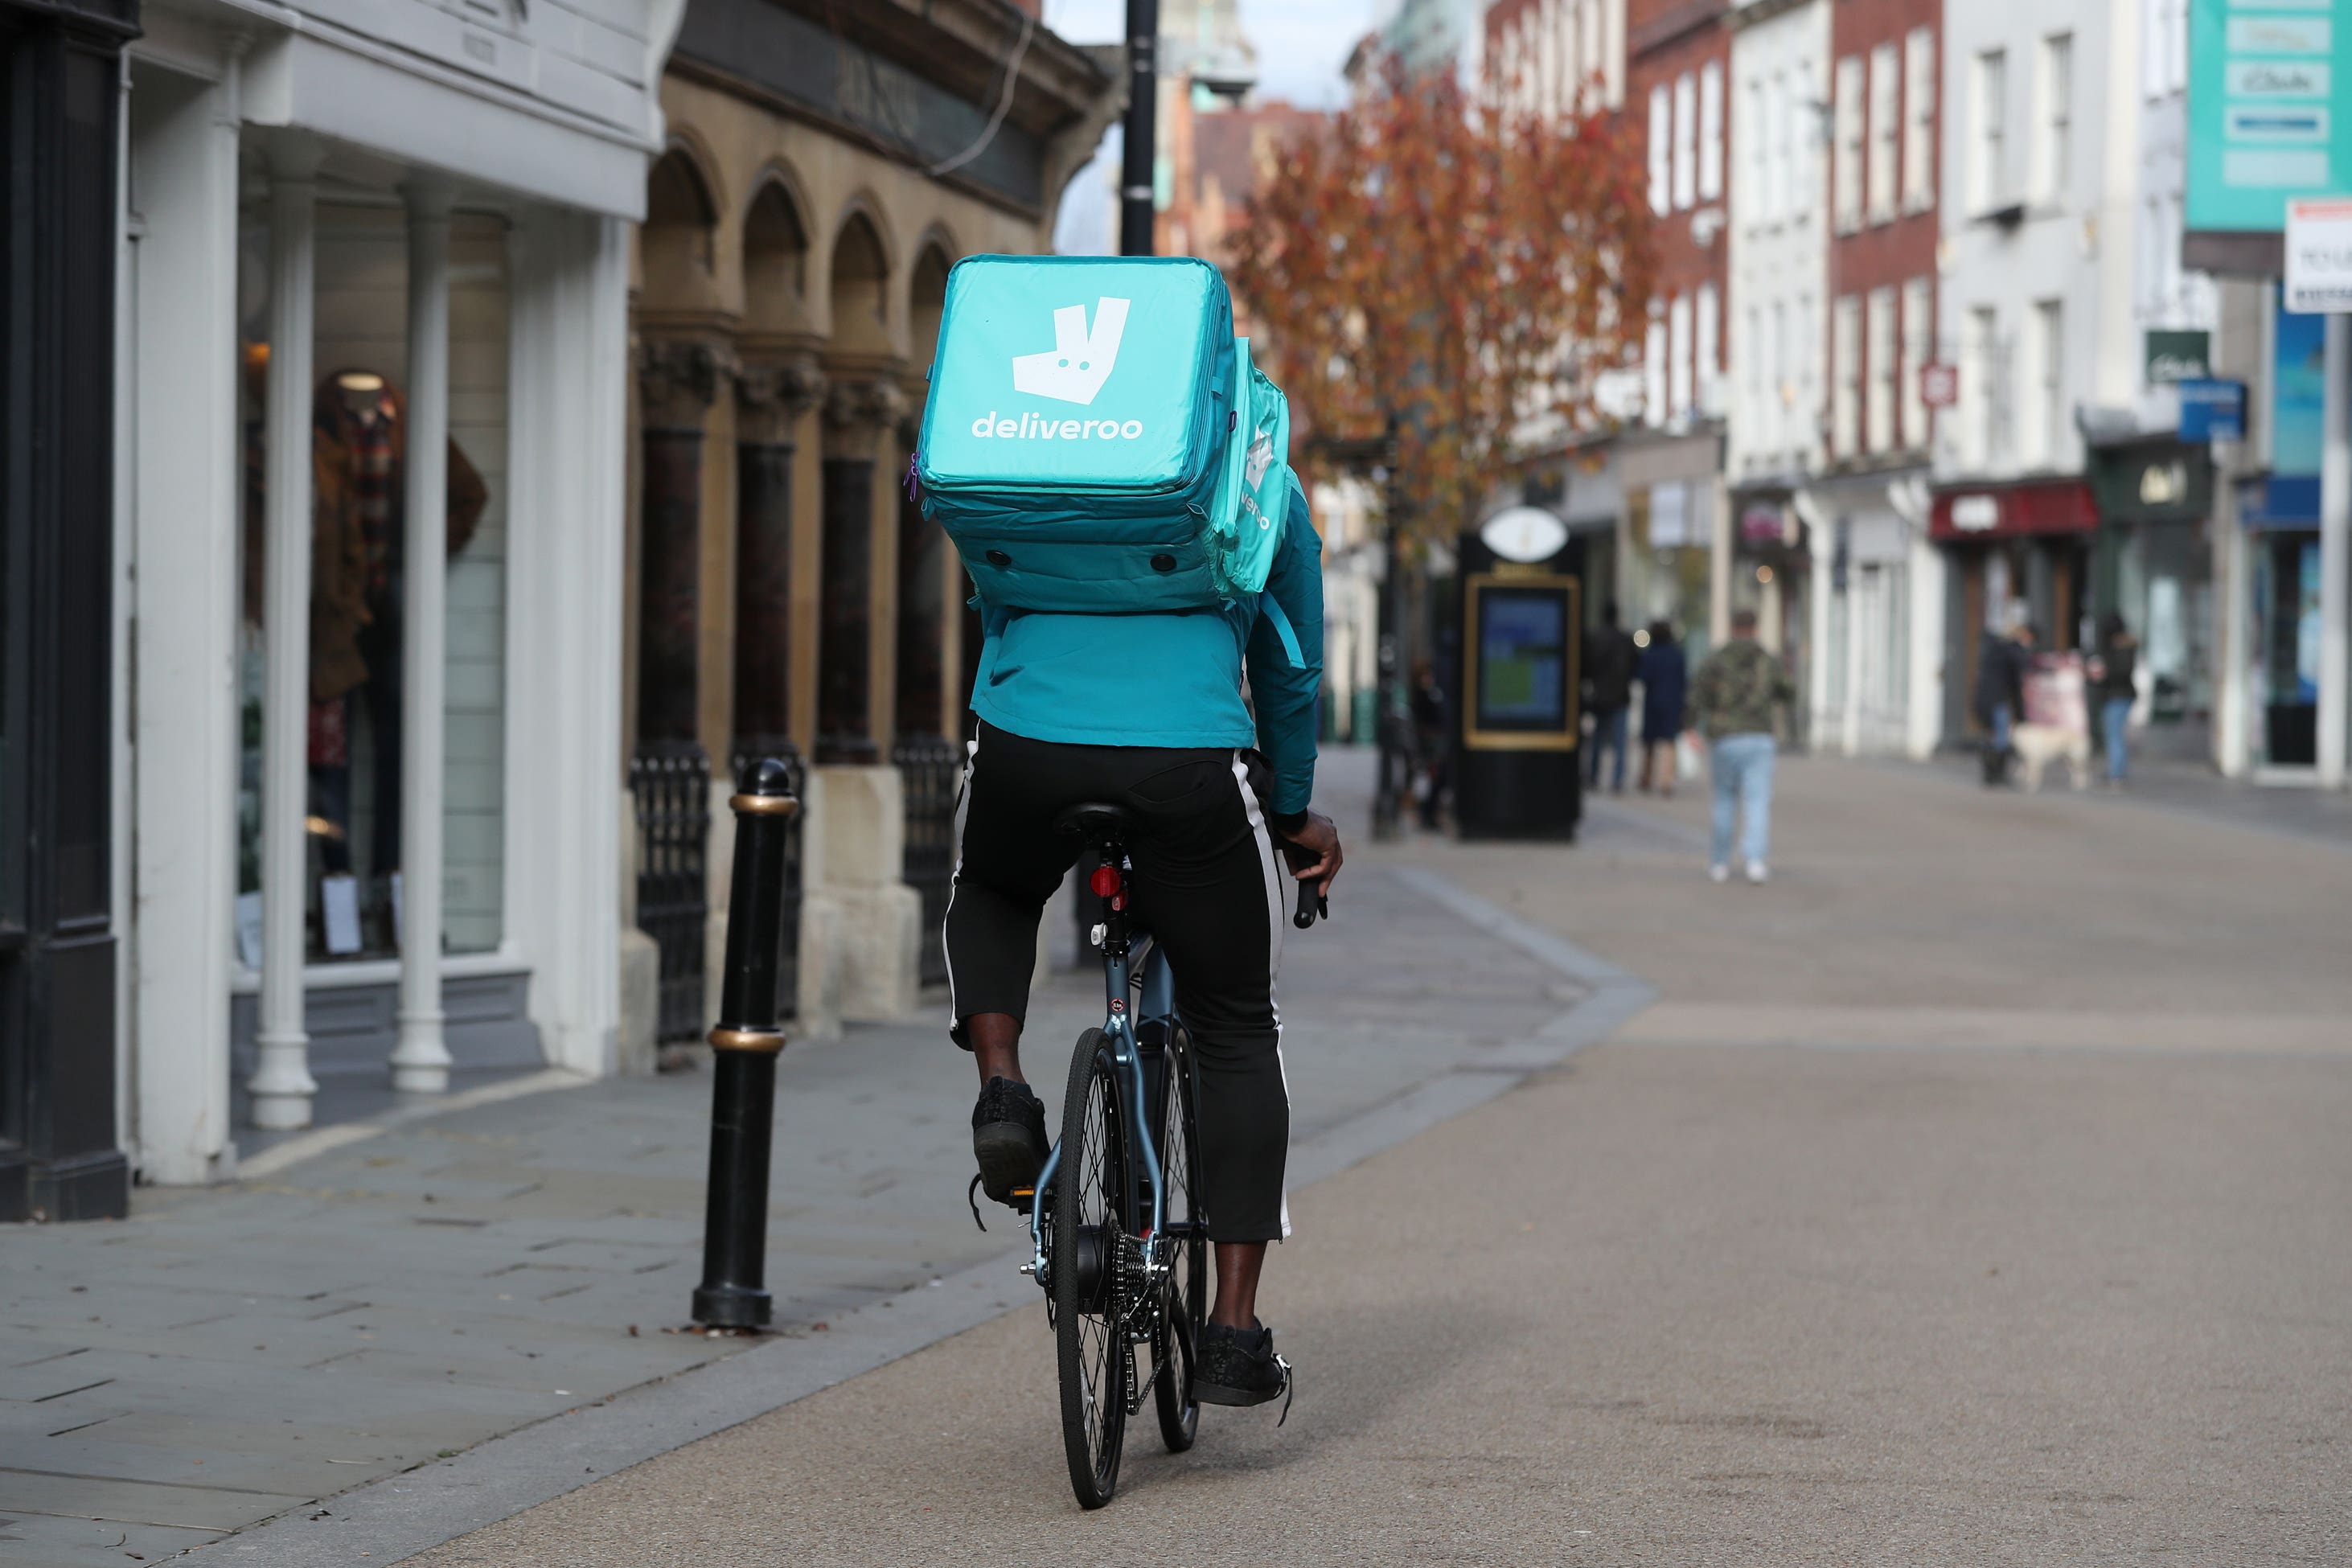 Shares in Deliveroo have been given a boost (David Davies/PA)